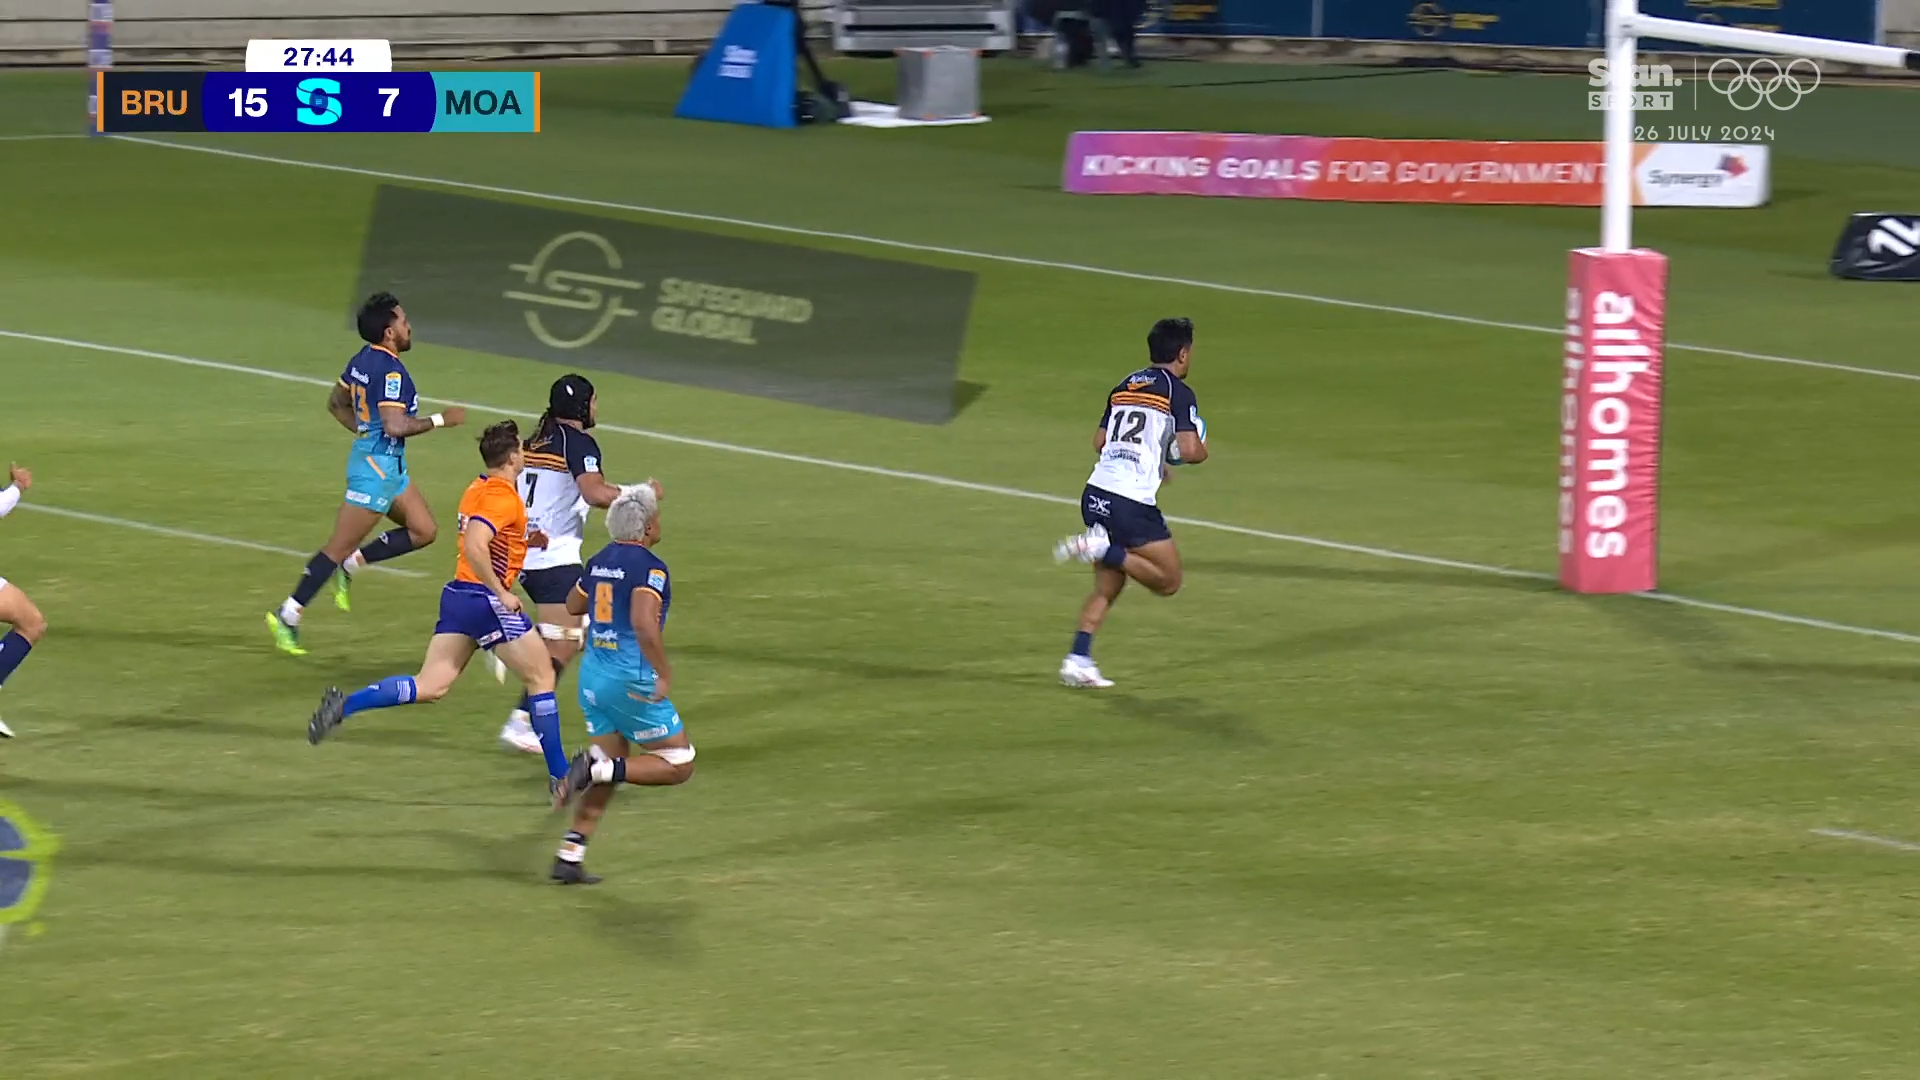 Early contender for Brumbies try of the year